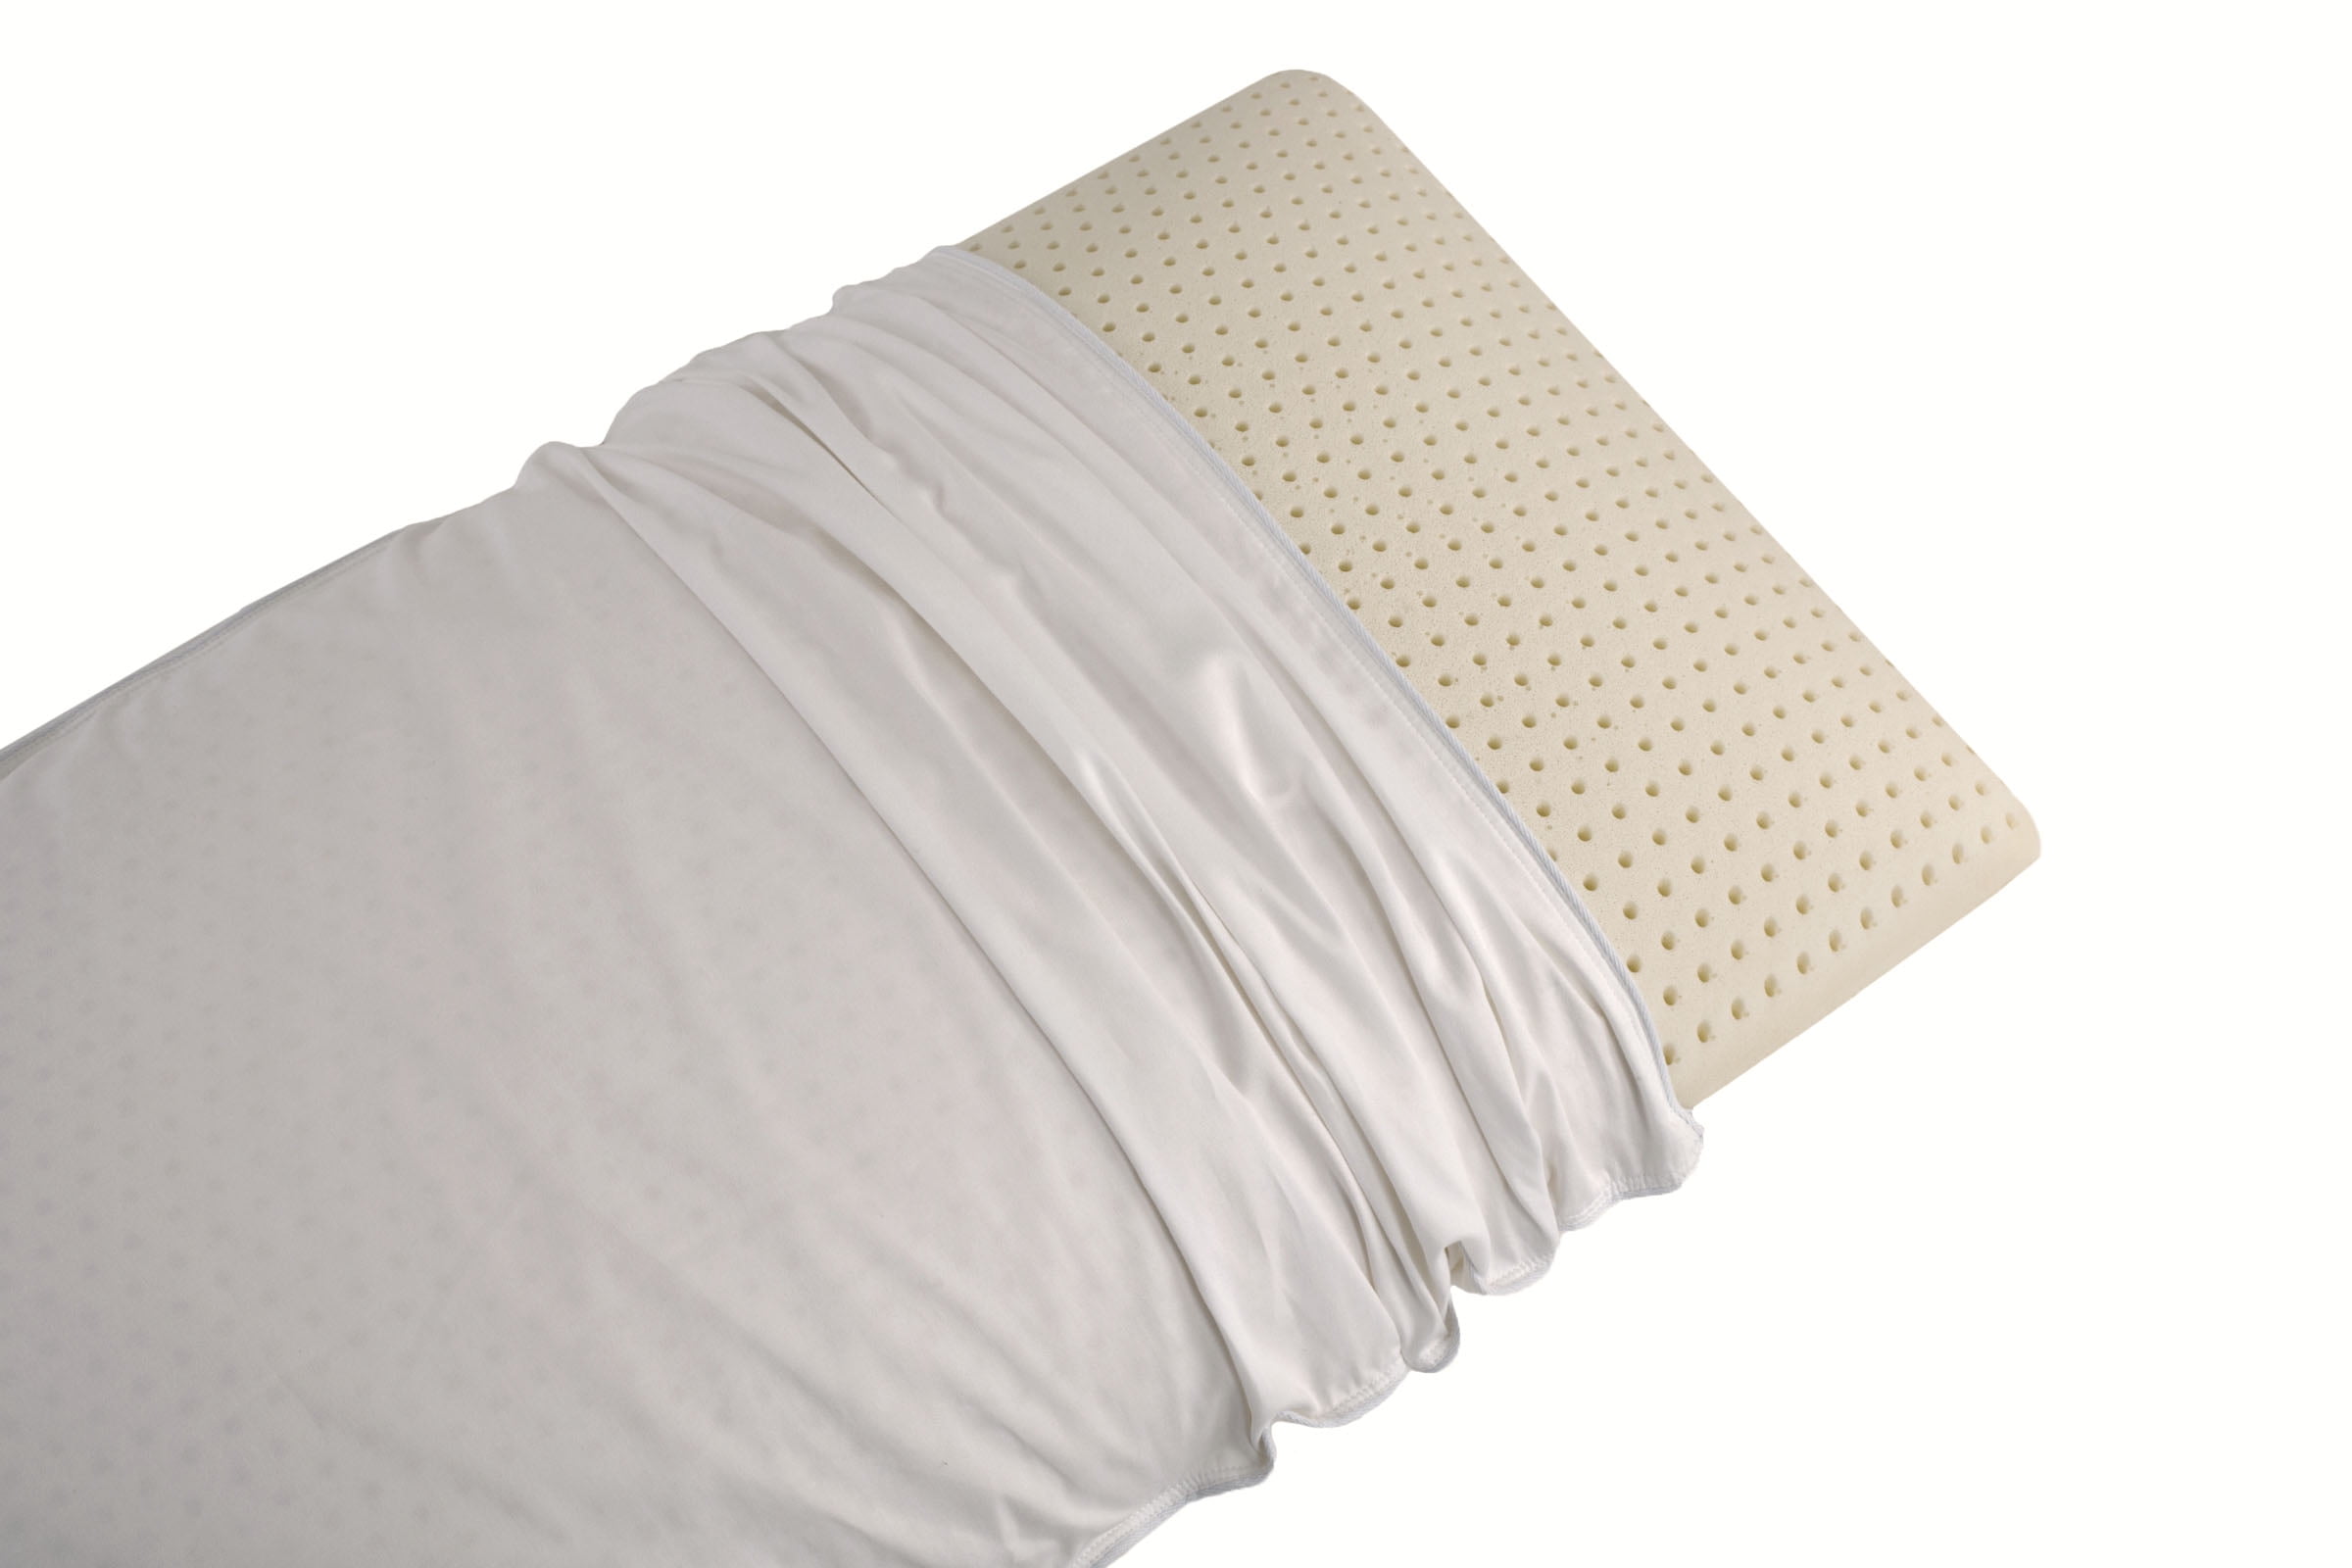 Living Healthy PCF-63 Dream Latex Pillow King 